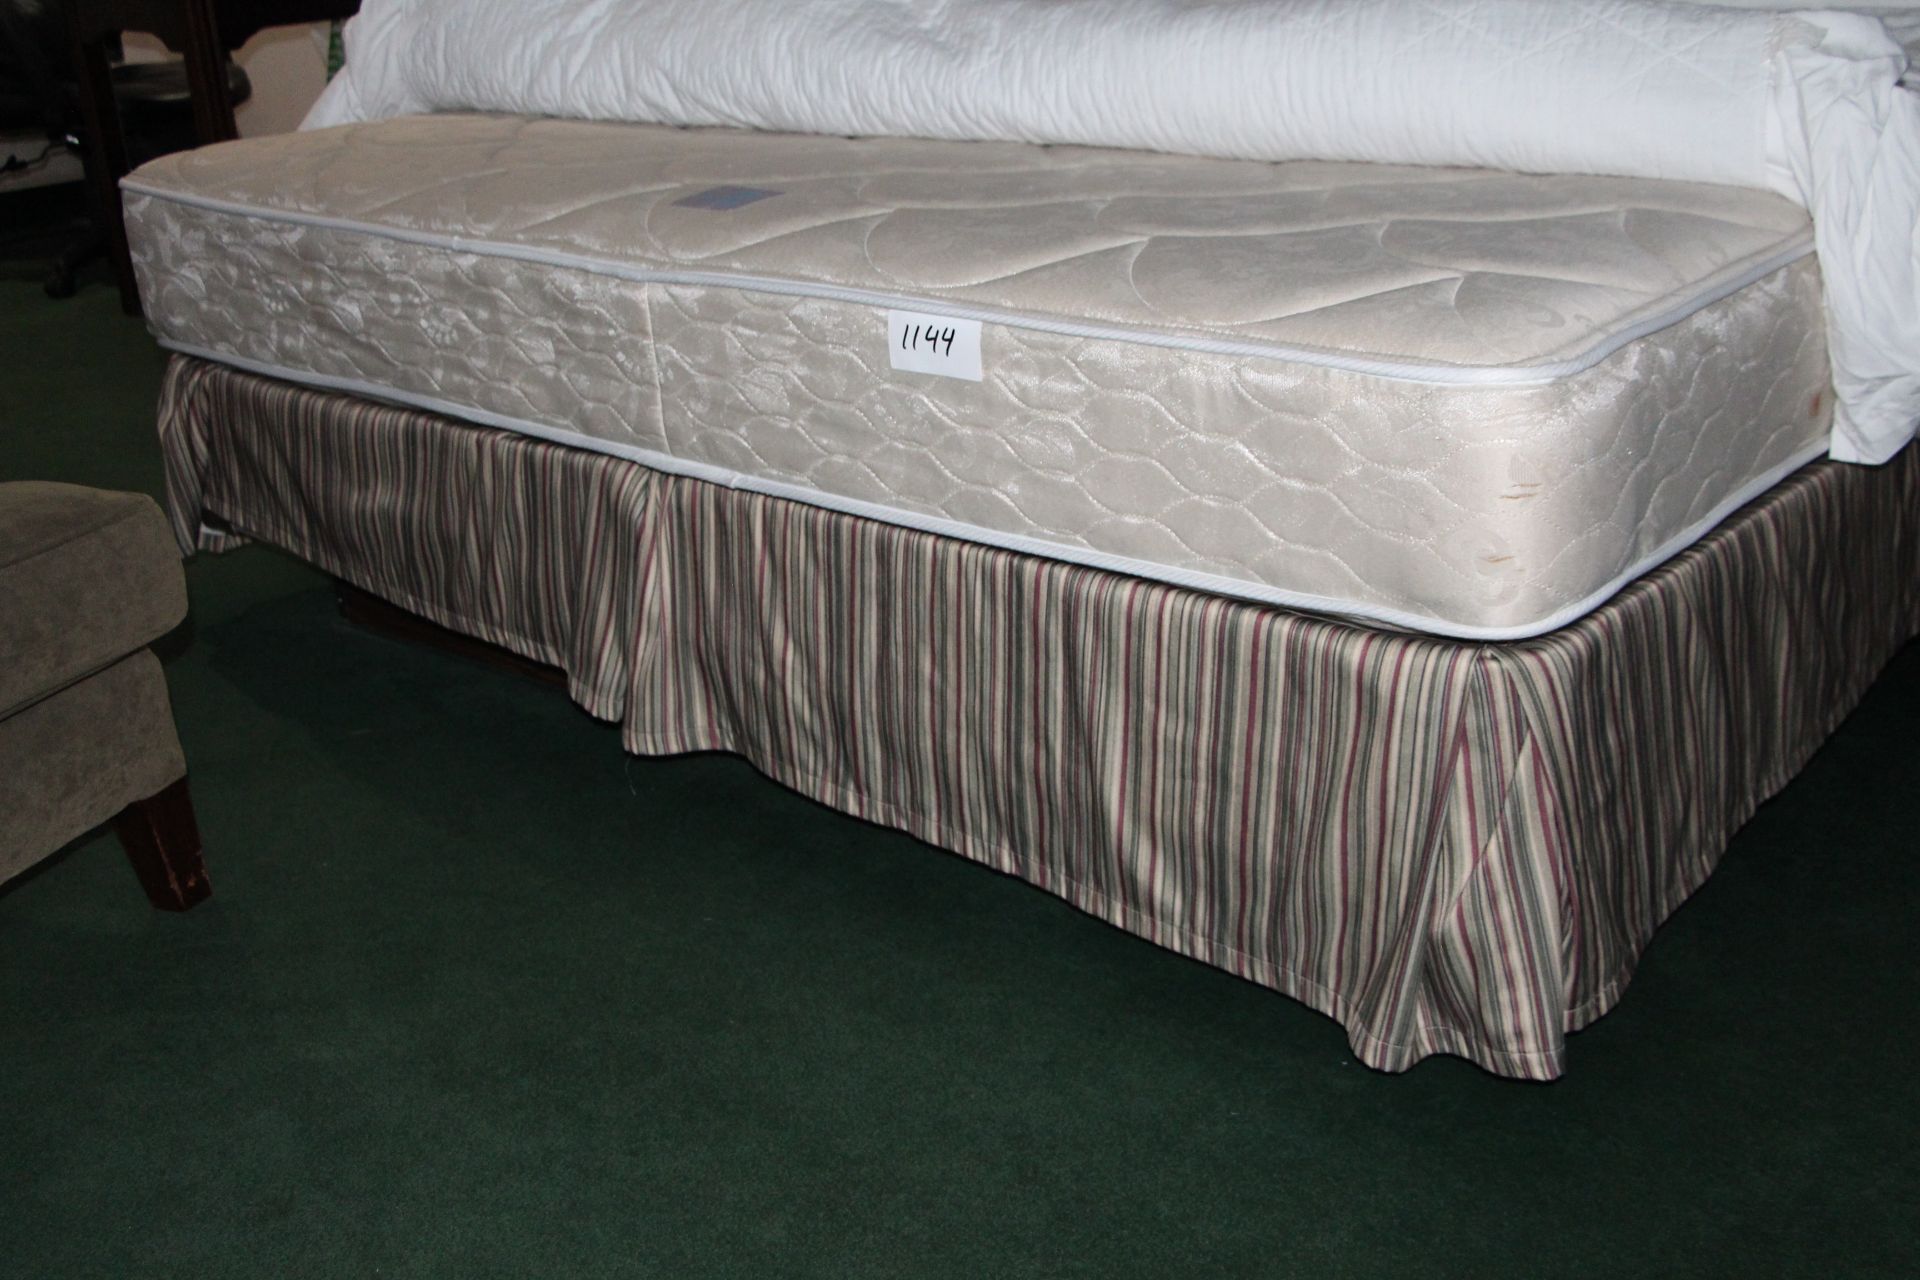 King size mattress with box spring, bed skirt and matching window drape